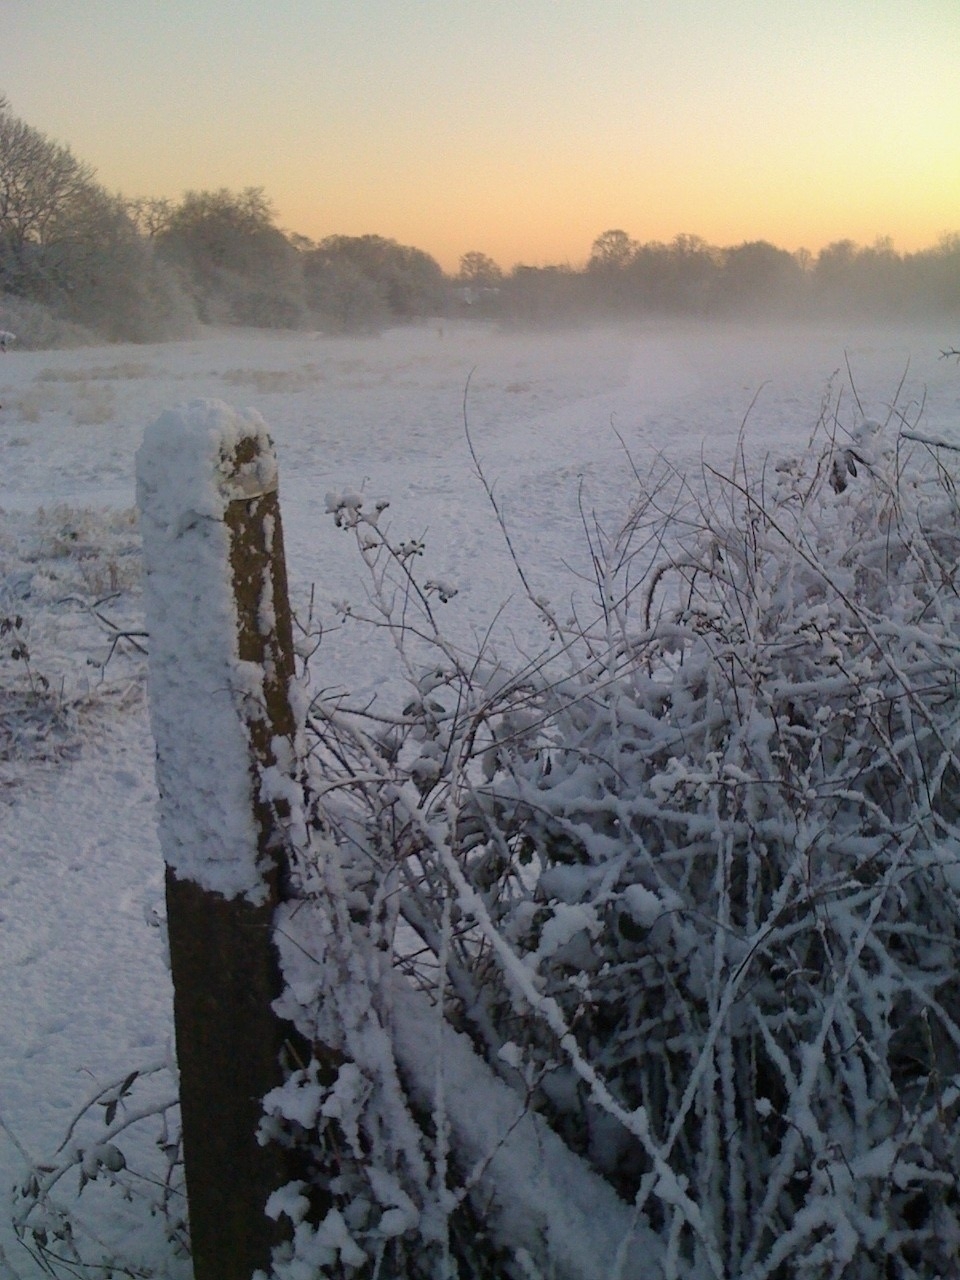 A frosty field with the pale orange glow of the sun just starting to set into the mist in the background. In the foreground is a hedge and fencepost, coated in snow and ice.